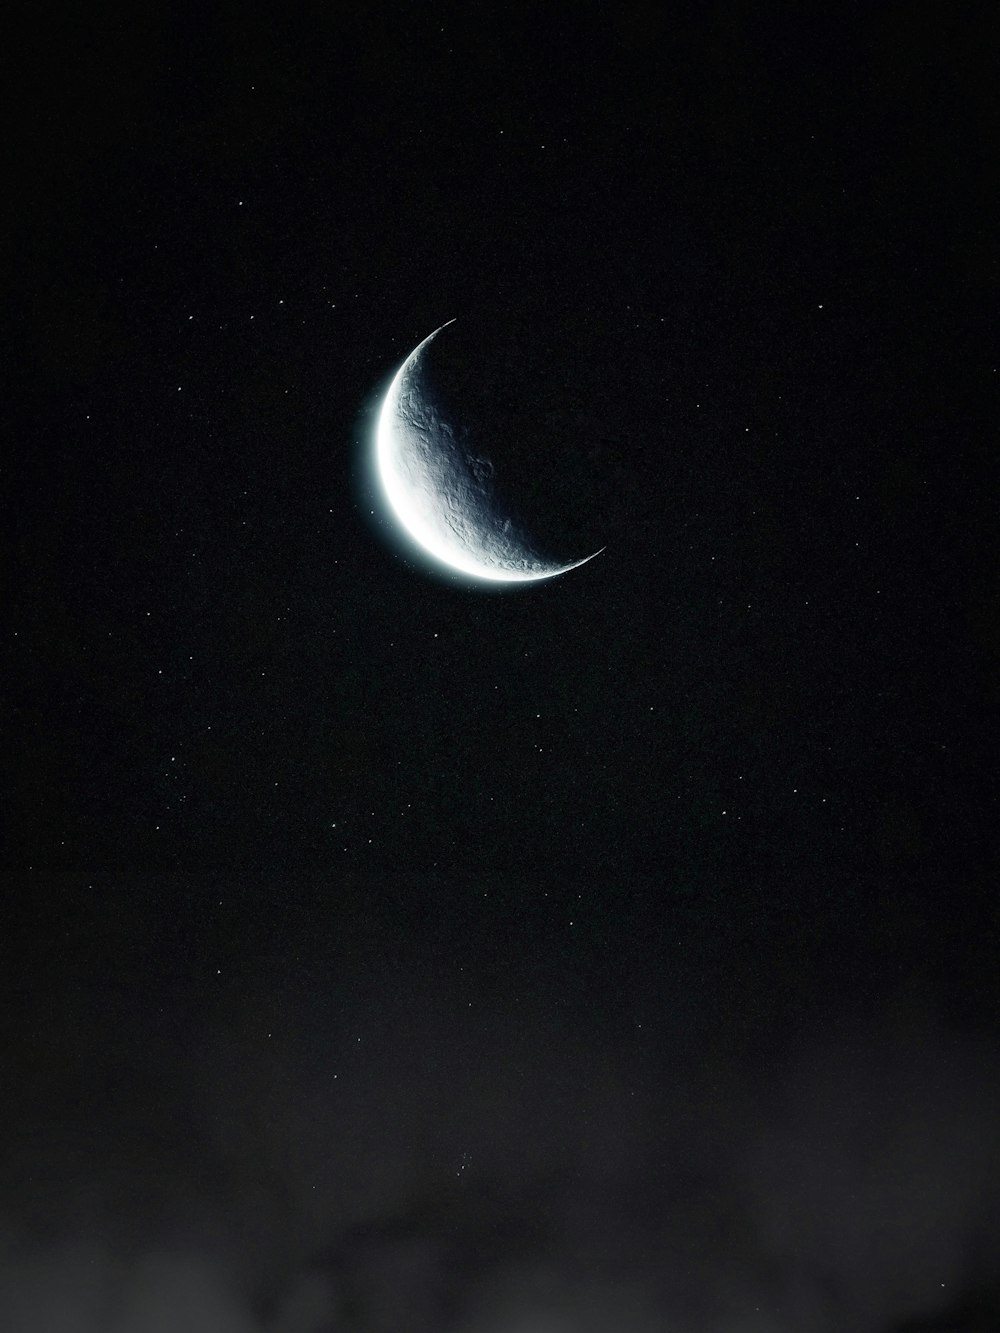 a crescent moon in the night sky